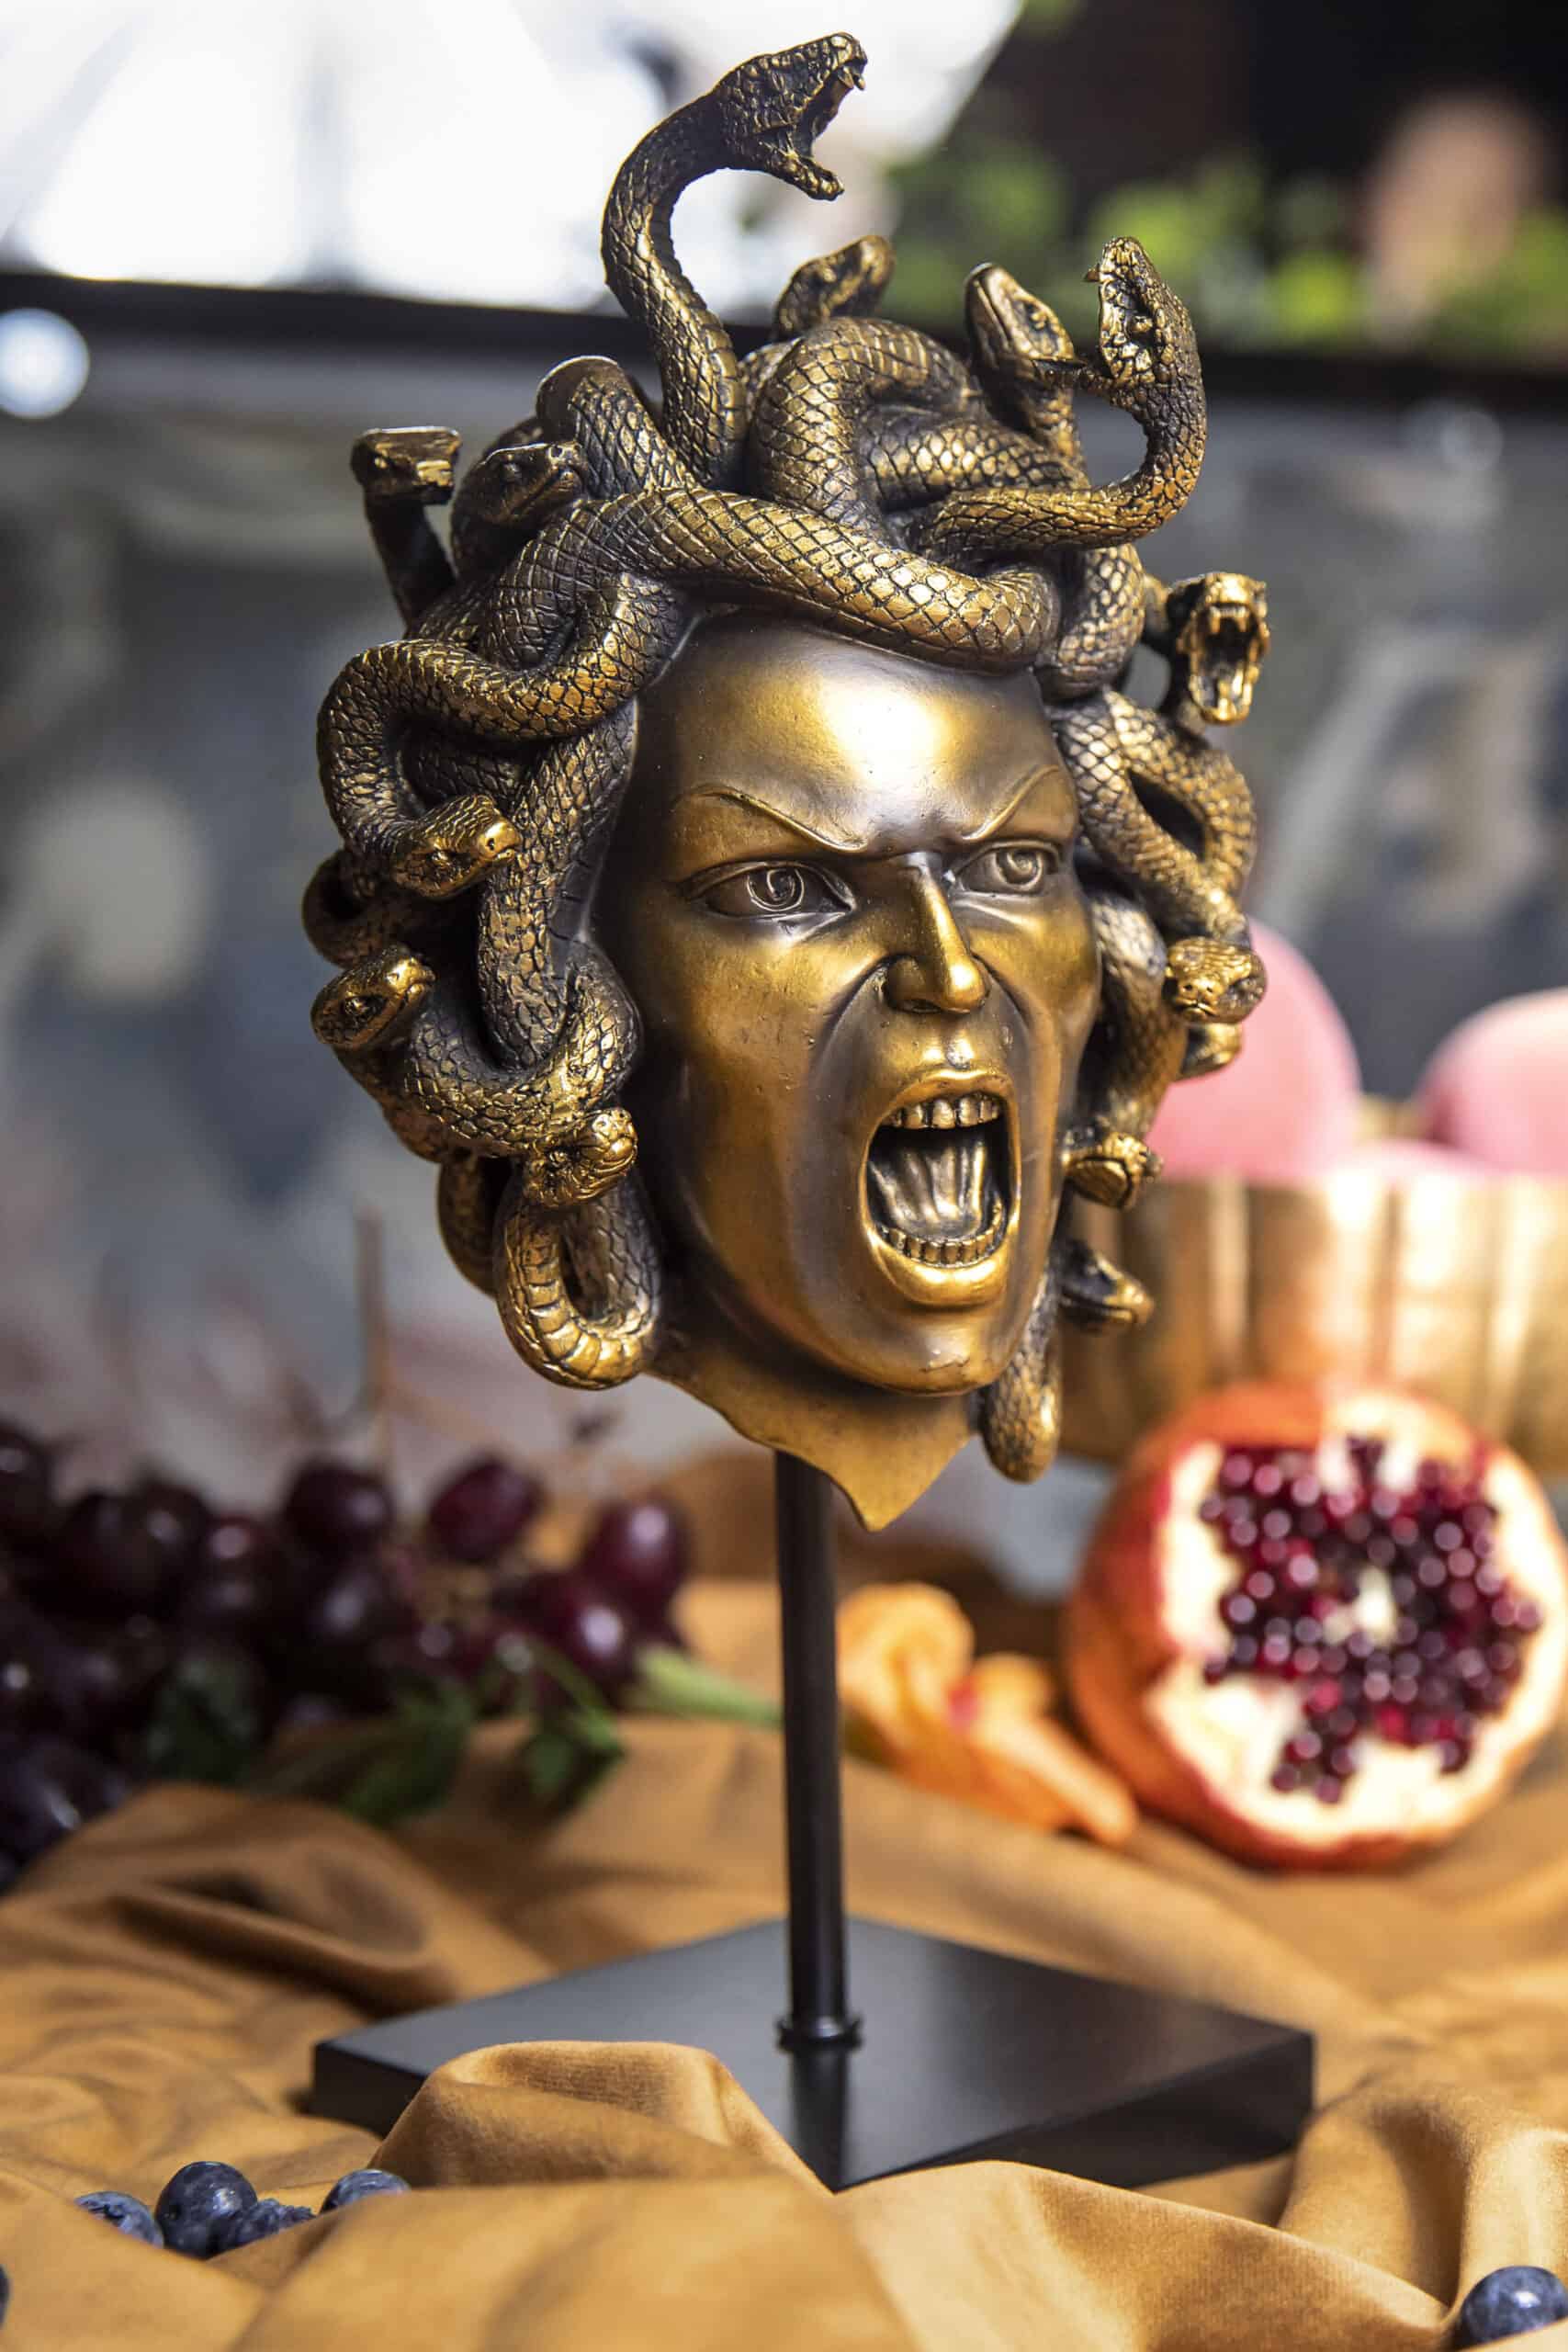 A gold statue of Medusa's head with various fruits in the background.